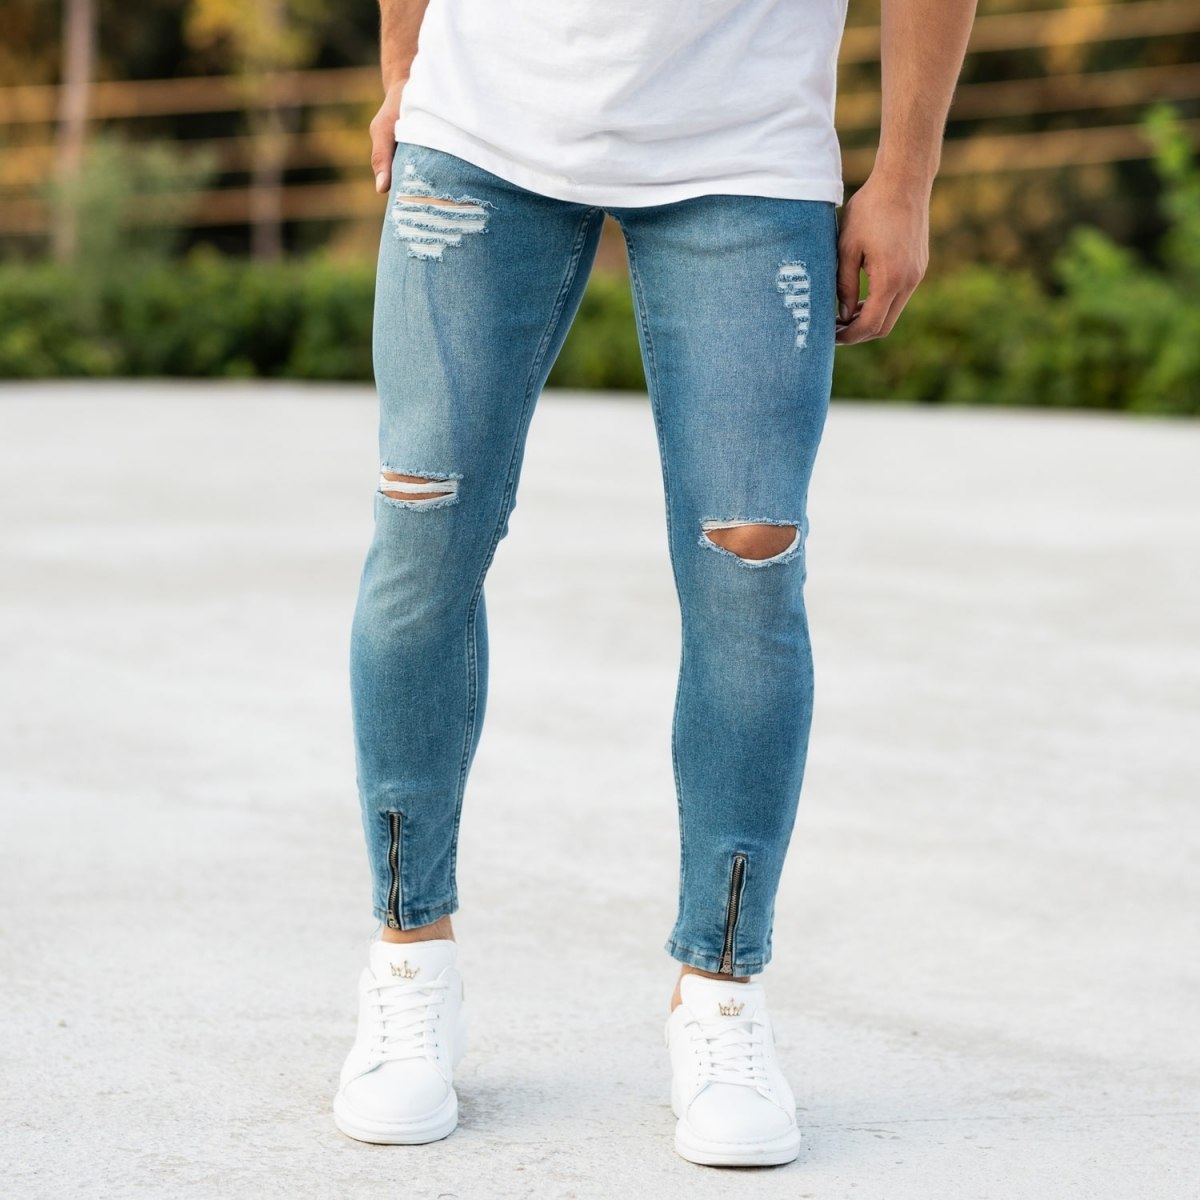 Men's Blue Ripped&Zipped Jeans